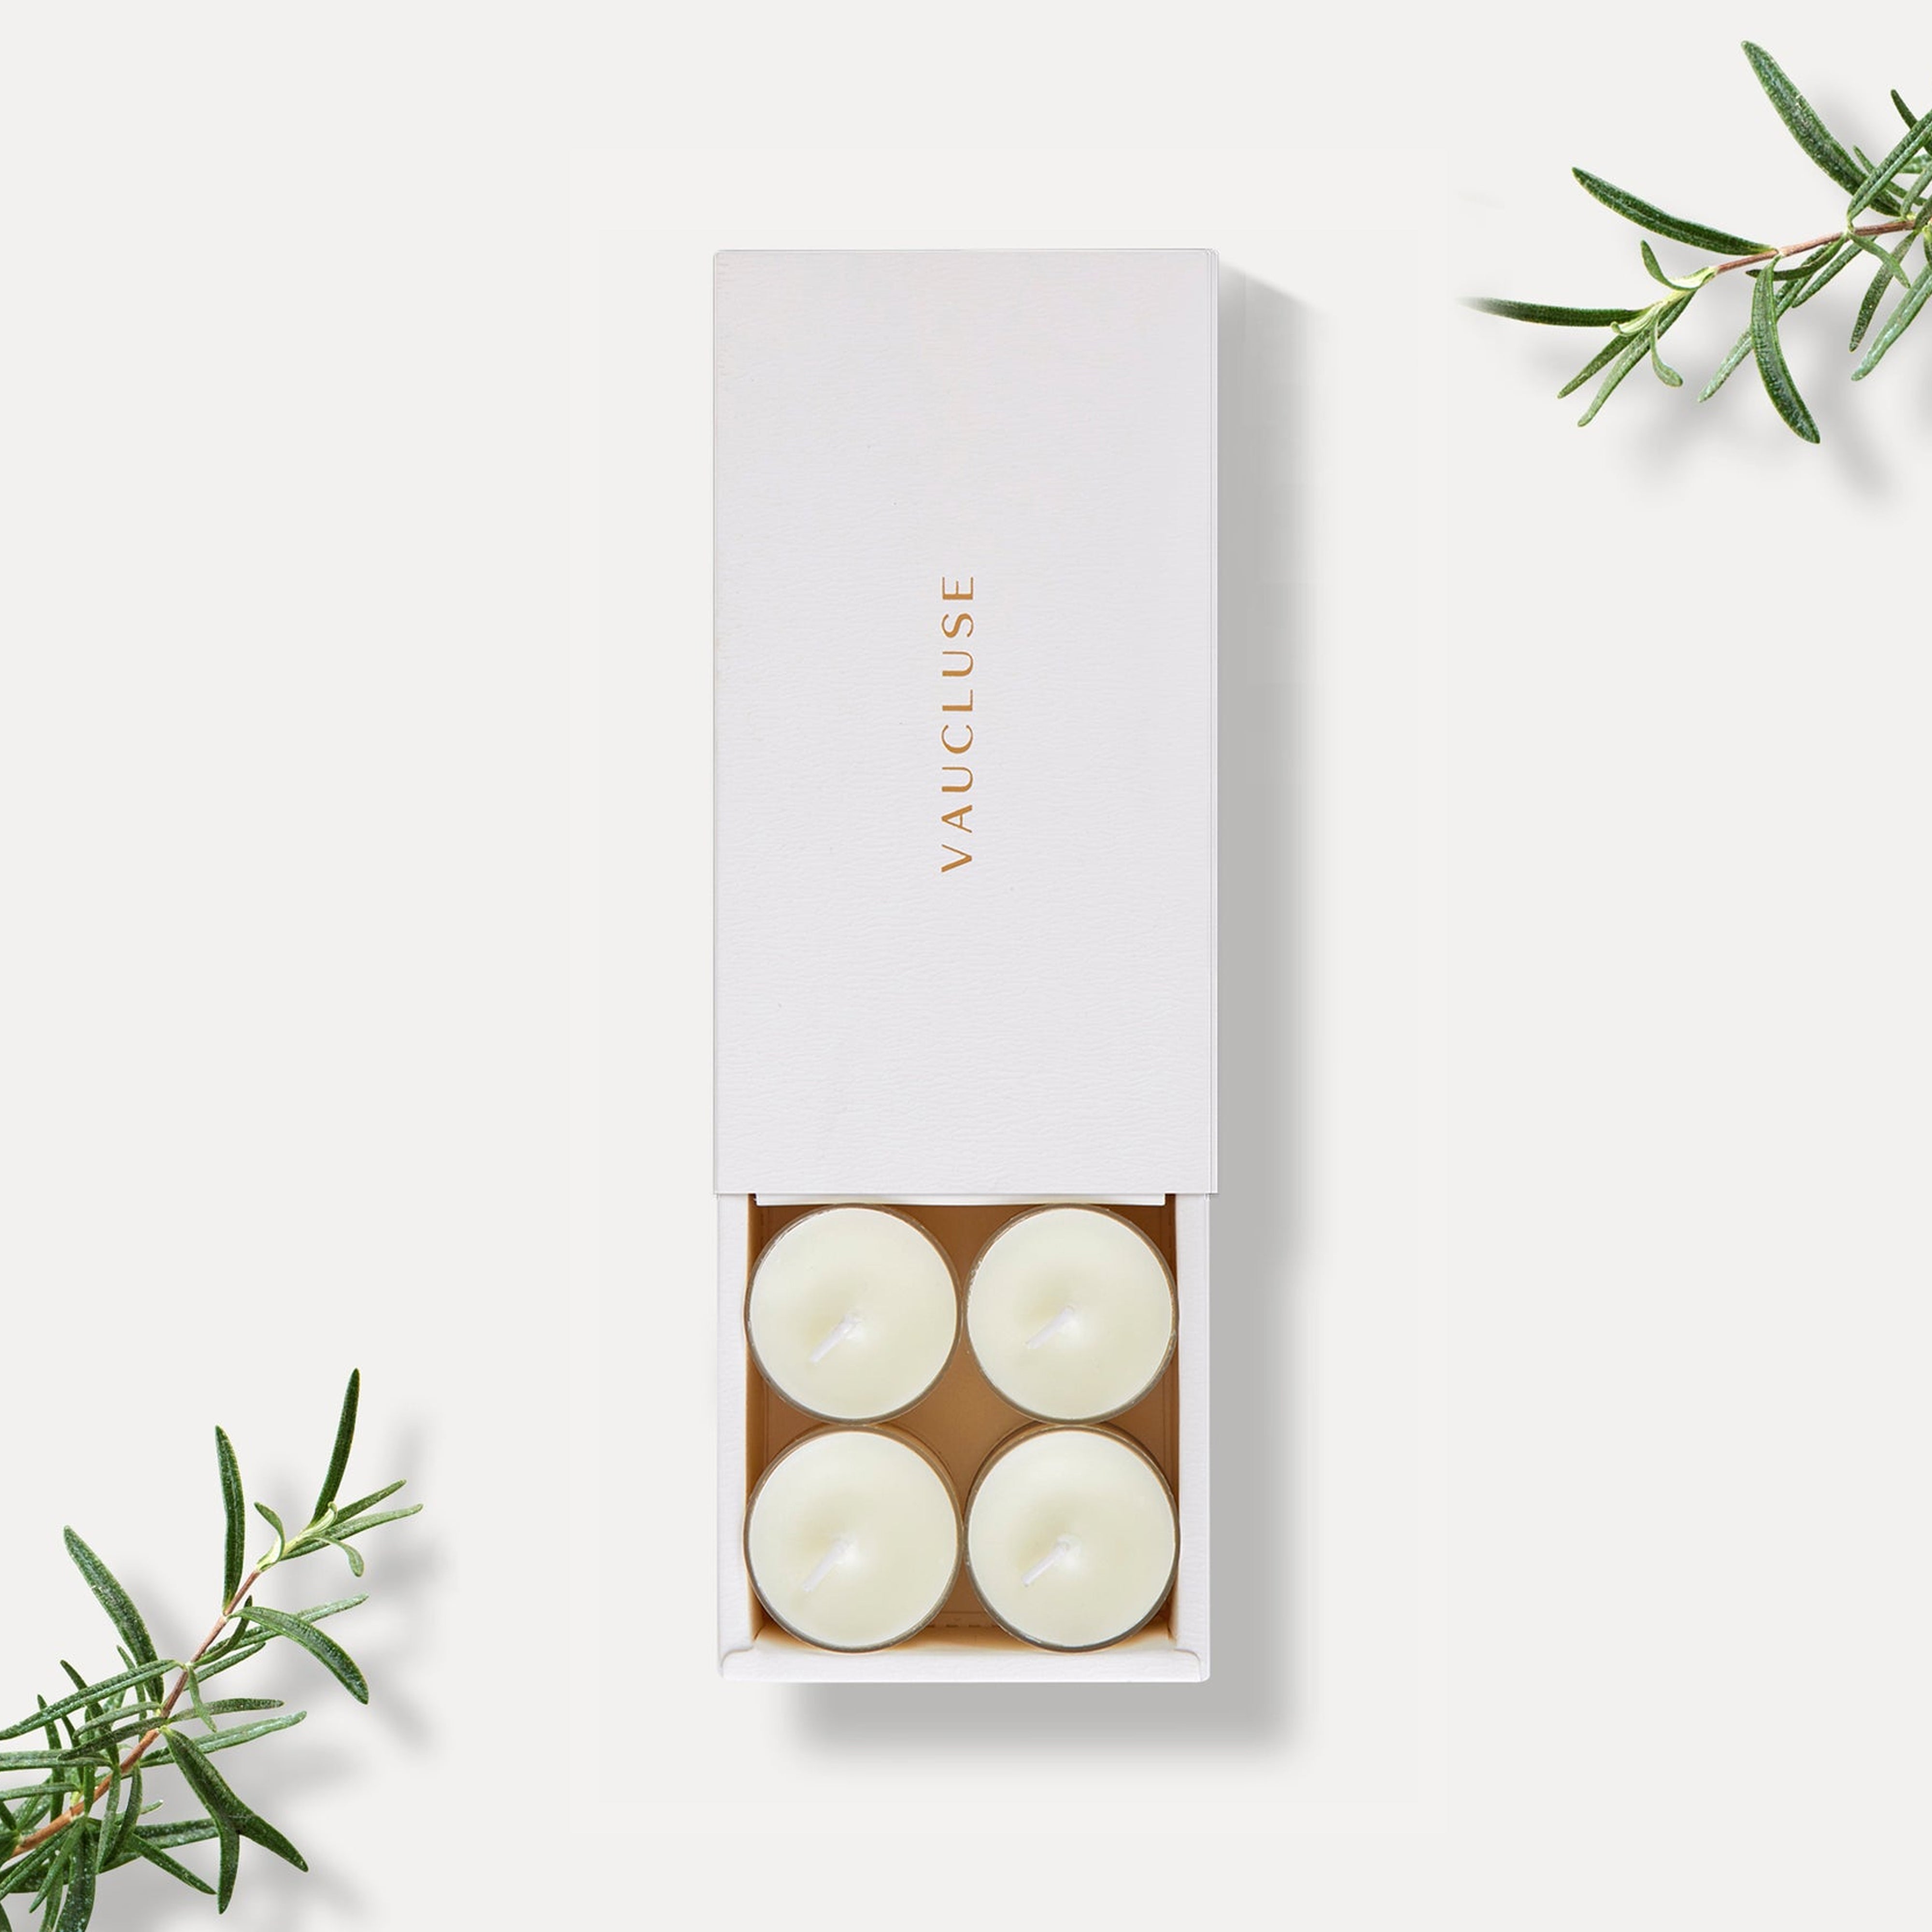 Vanilla Scented Tealight Candles - VAUCLUSE